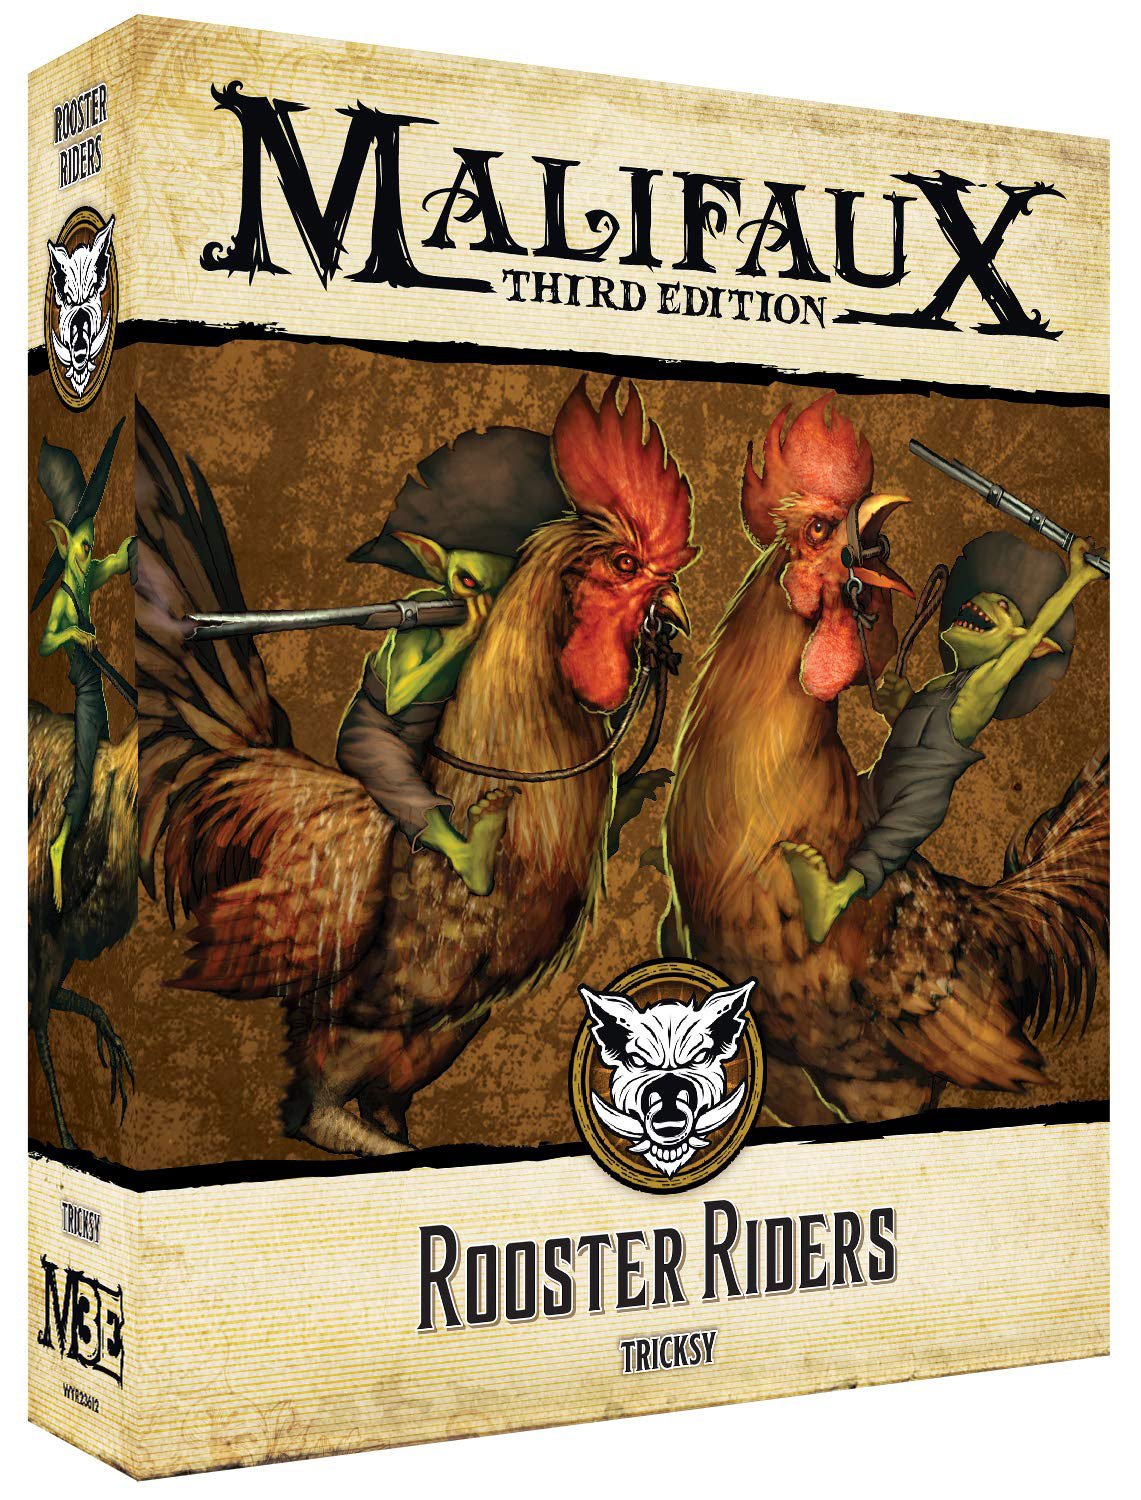 Rooster Riders | All About Games